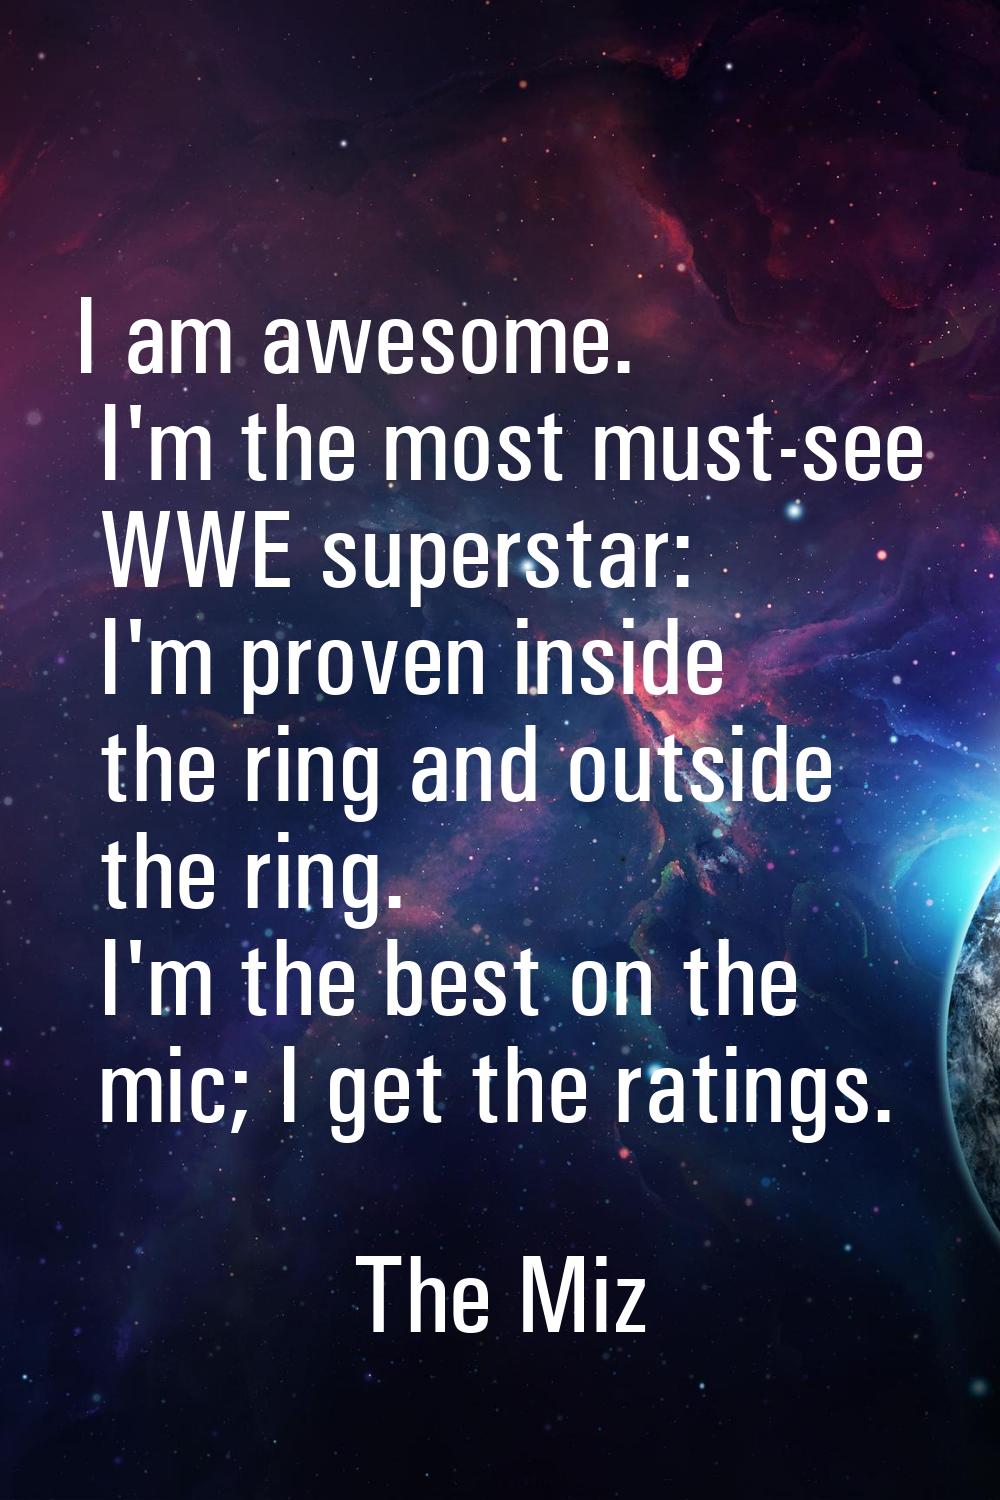 I am awesome. I'm the most must-see WWE superstar: I'm proven inside the ring and outside the ring.